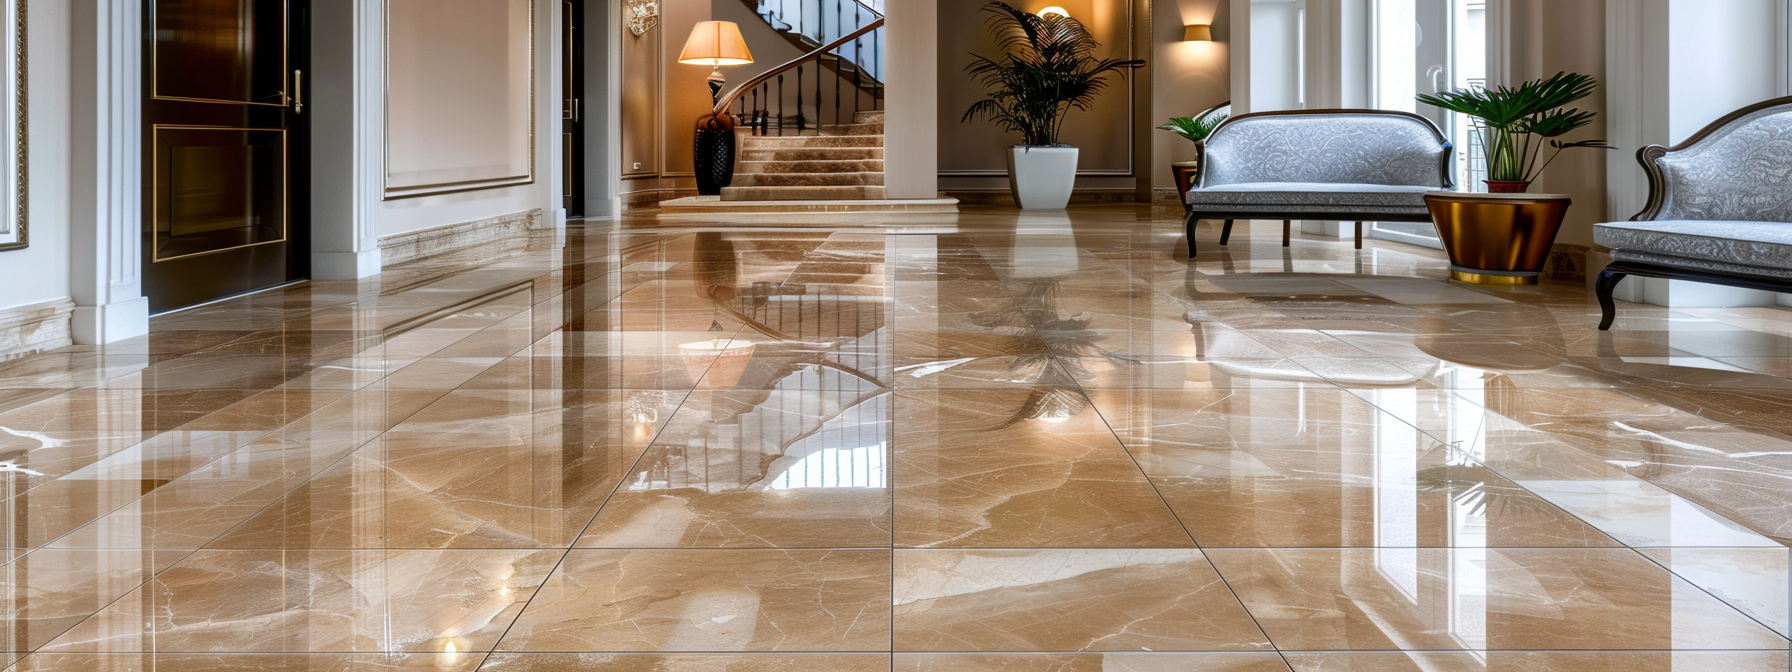 Maintaining the Beauty of Porcelain Tiles Through Effective Grout Cleaning